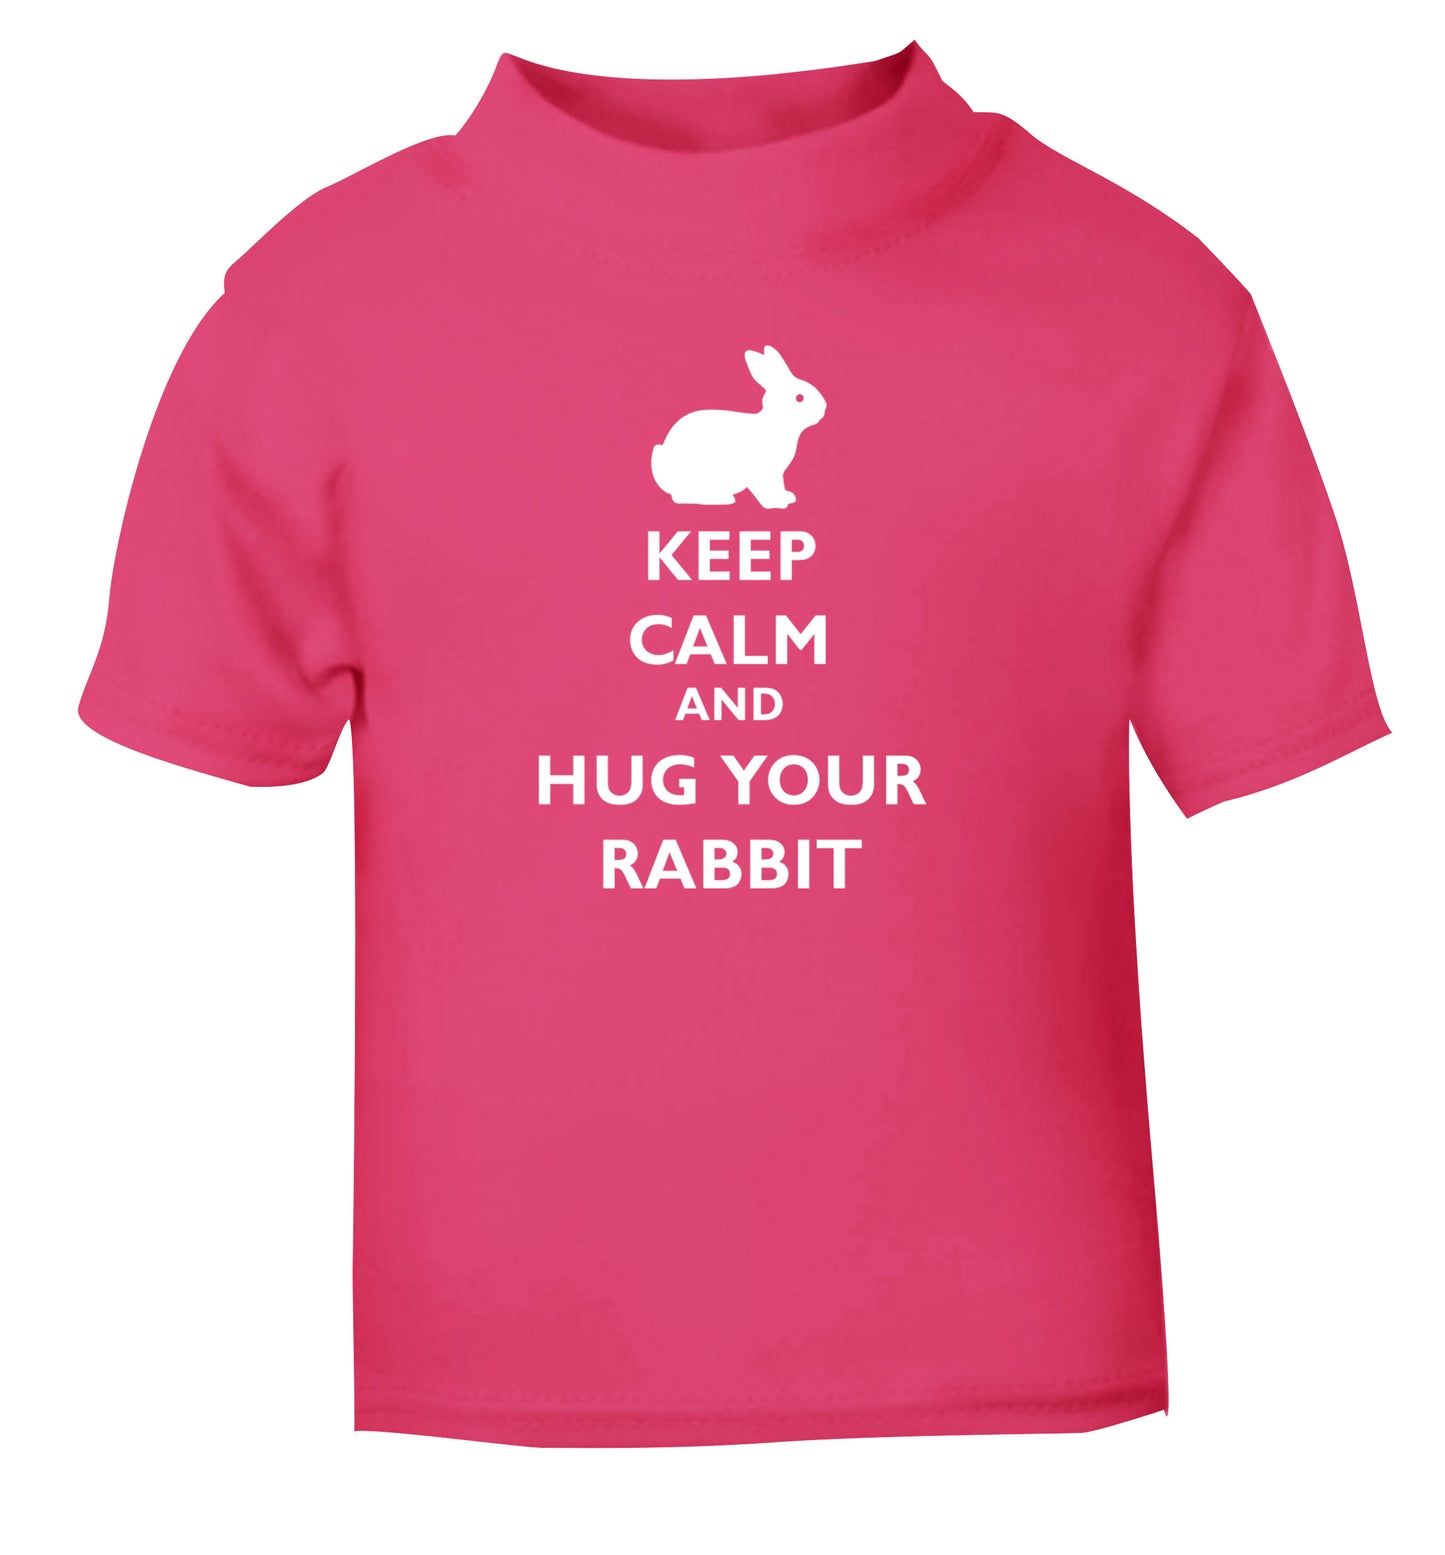 Keep calm and hug your rabbit pink Baby Toddler Tshirt 2 Years